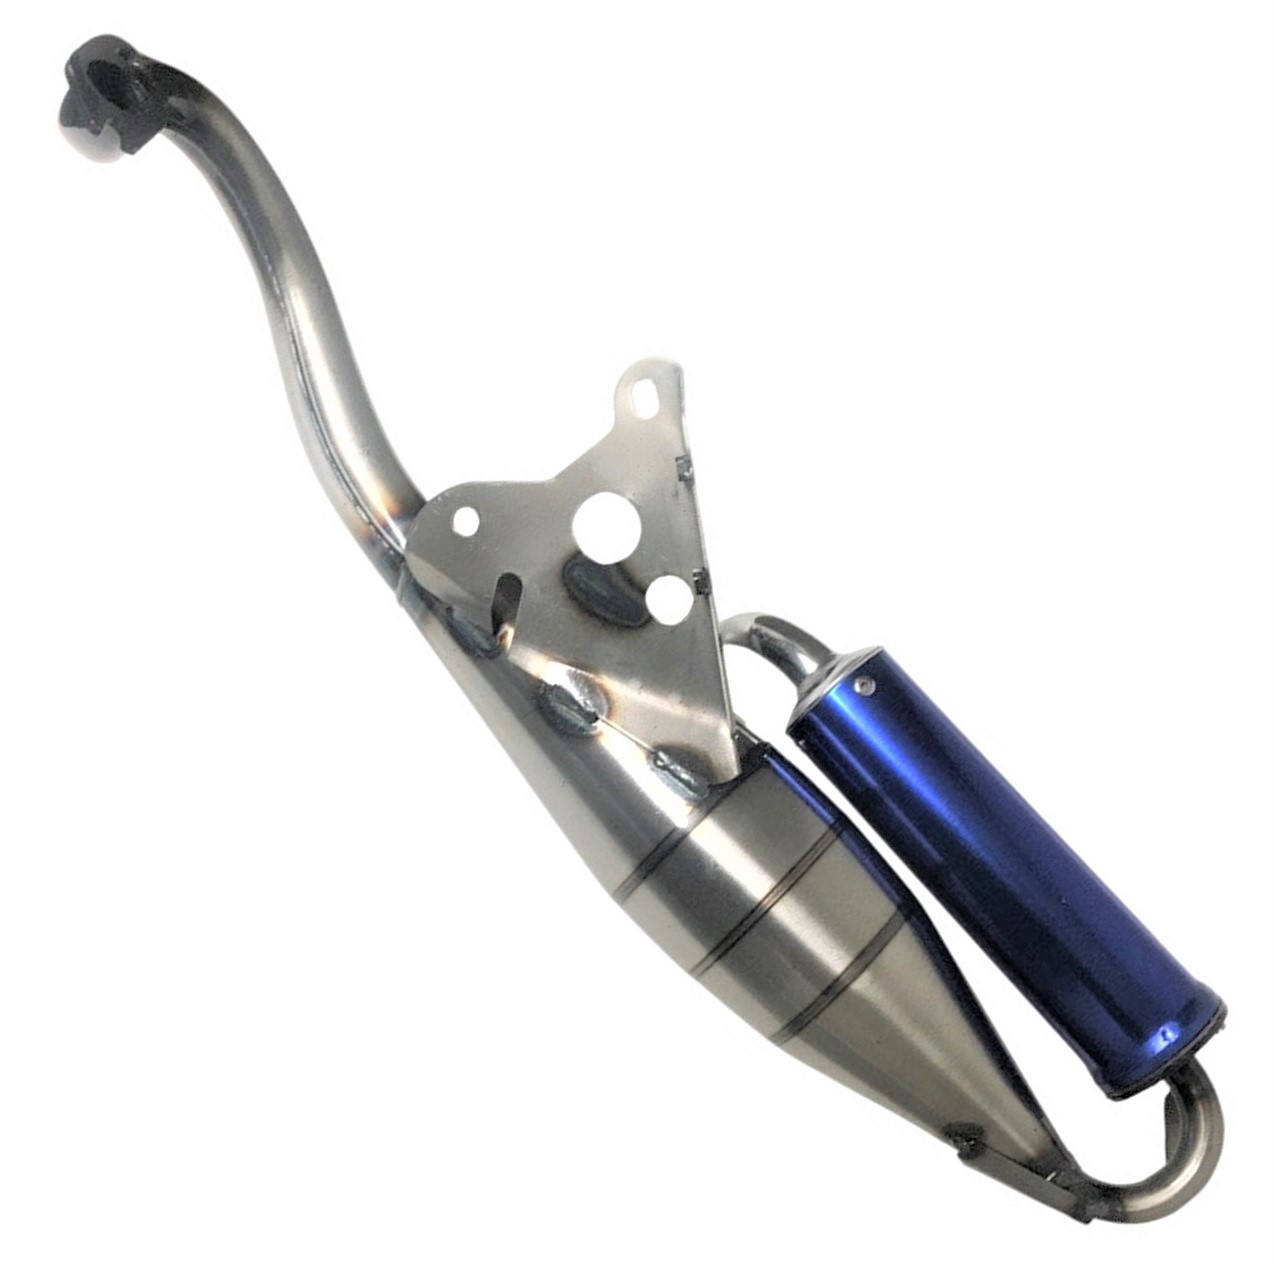 High Performance 2 Stroke Exhaust Fits Most Eton, Vento, Jog, Kymco, 50cc Scooters with the Minarelli - Jog Type Engine. Fits many other brands as well. - Click Image to Close